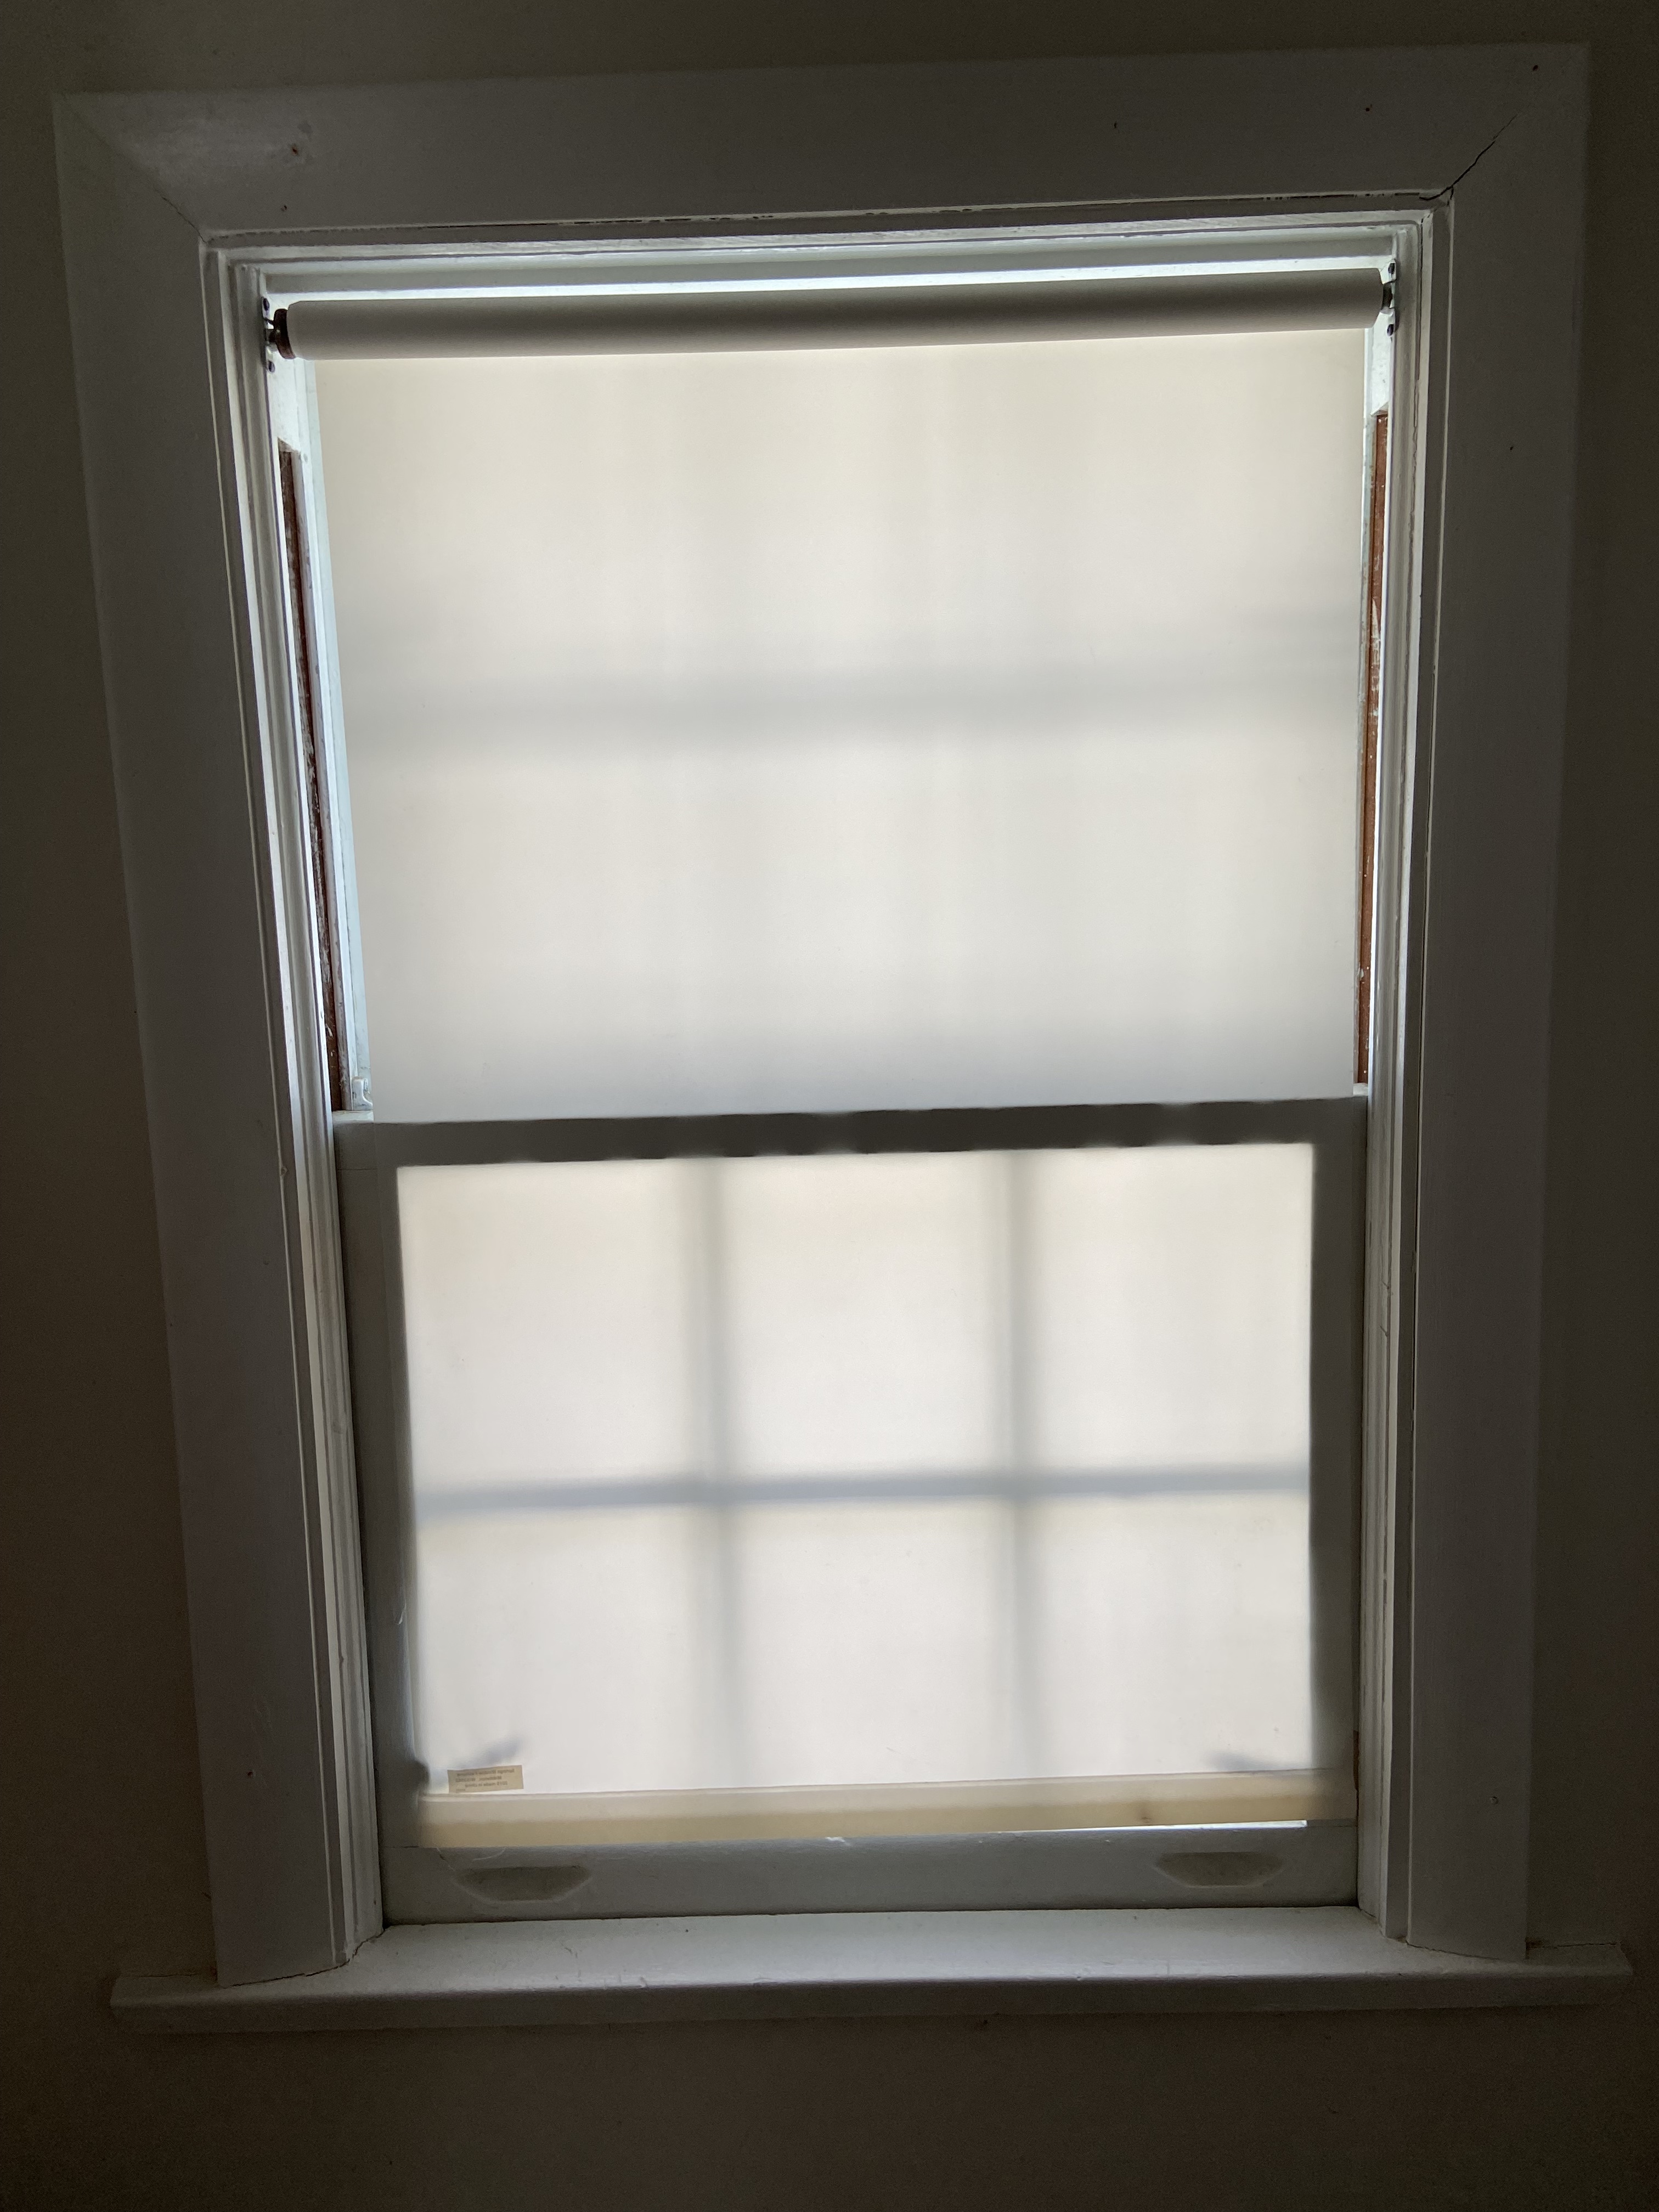 This is an image of a closed window. There is a white rollershade covering the window. 